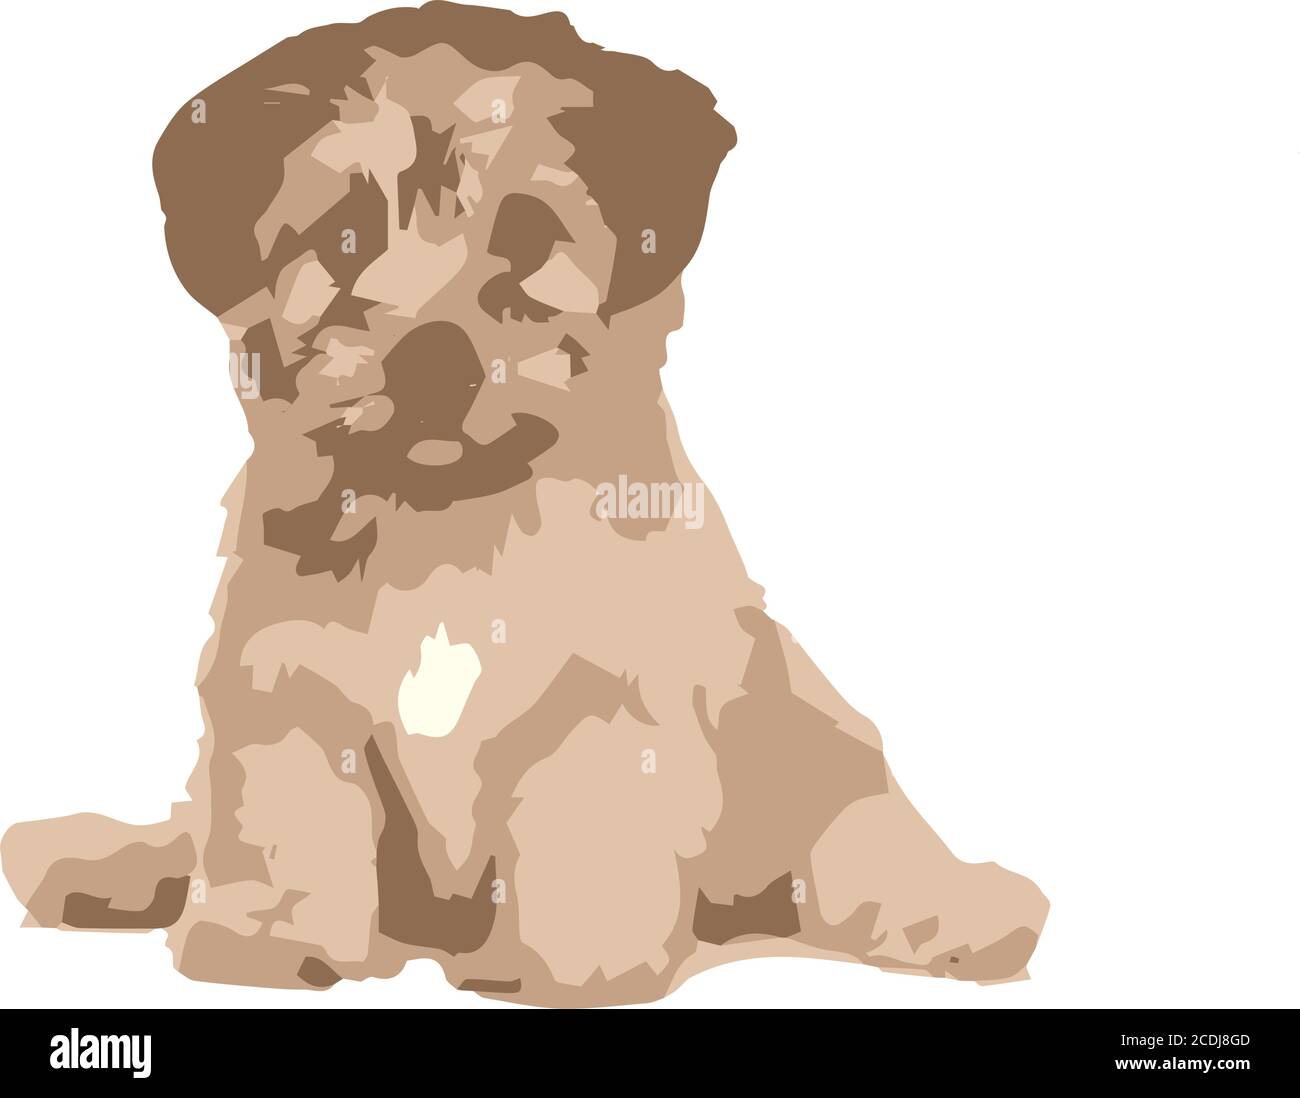 Dog, puppy vector illustration with white background Stock Vector